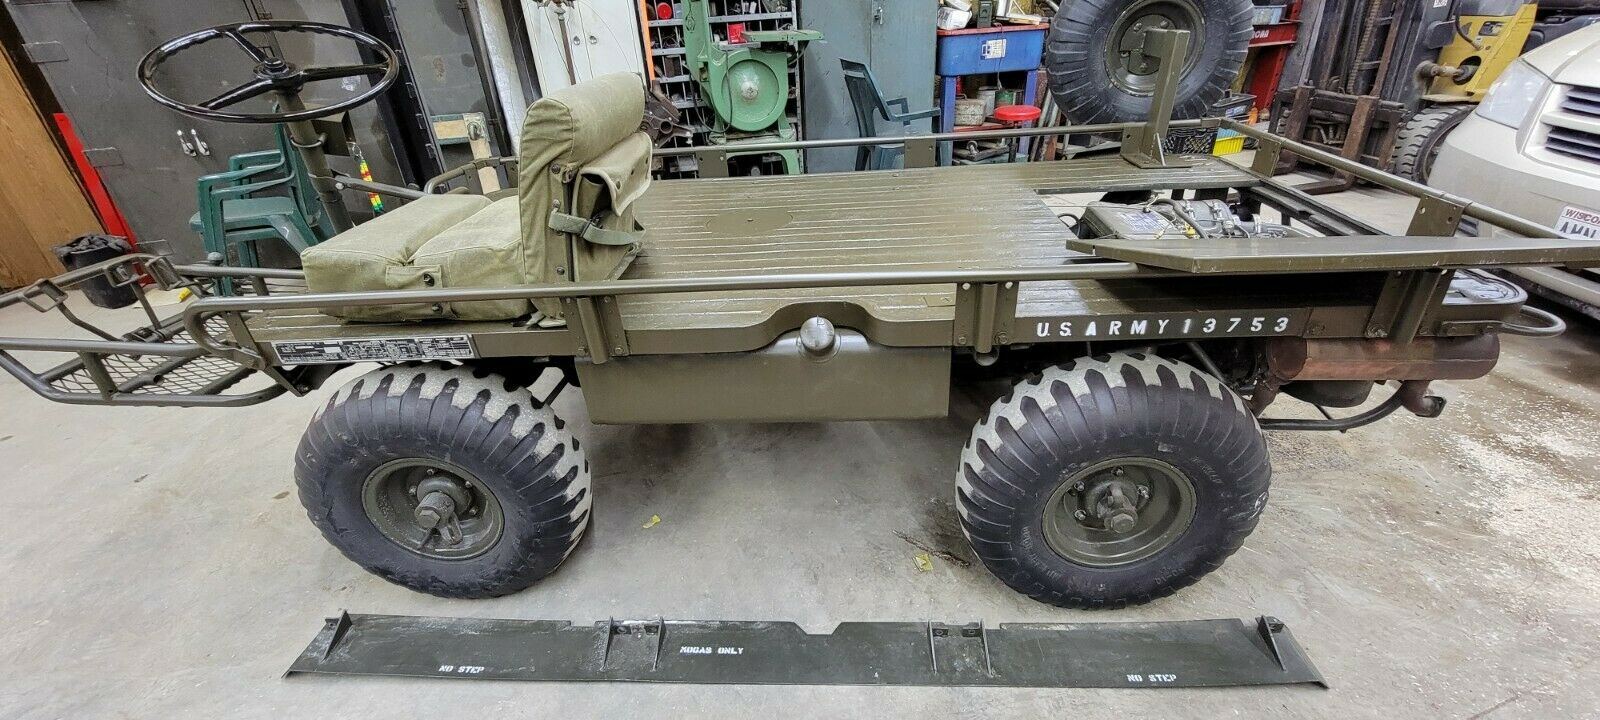 M274a4 Military Mule For Sale 2022 01 06 1 